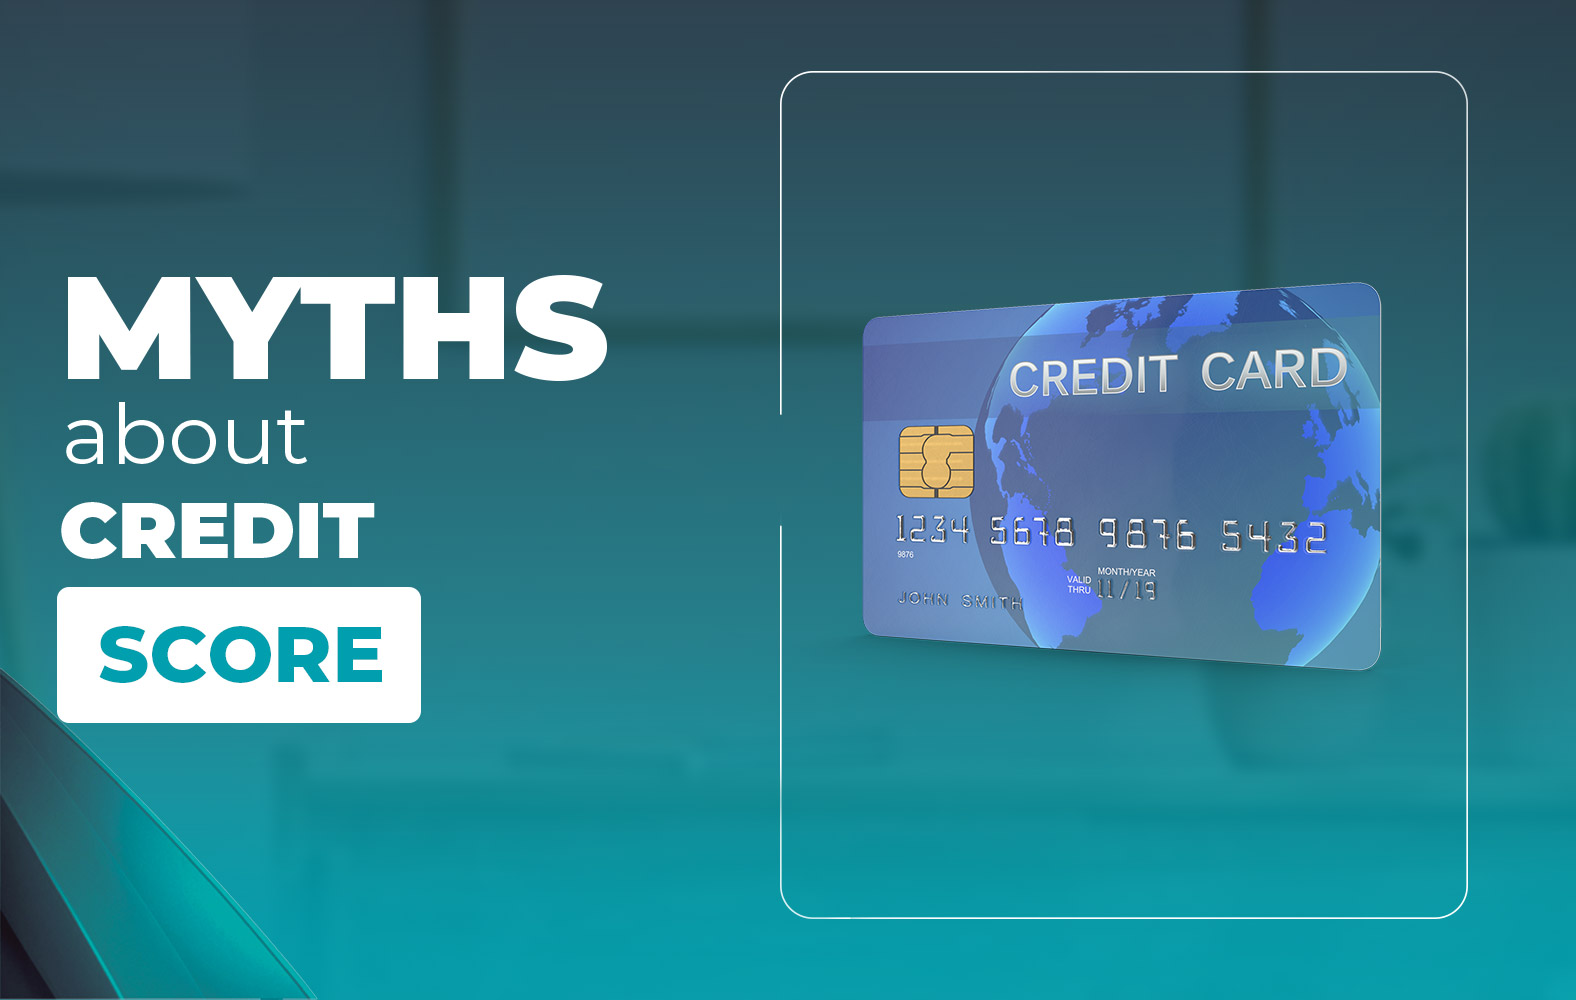 Some myths about credit scores